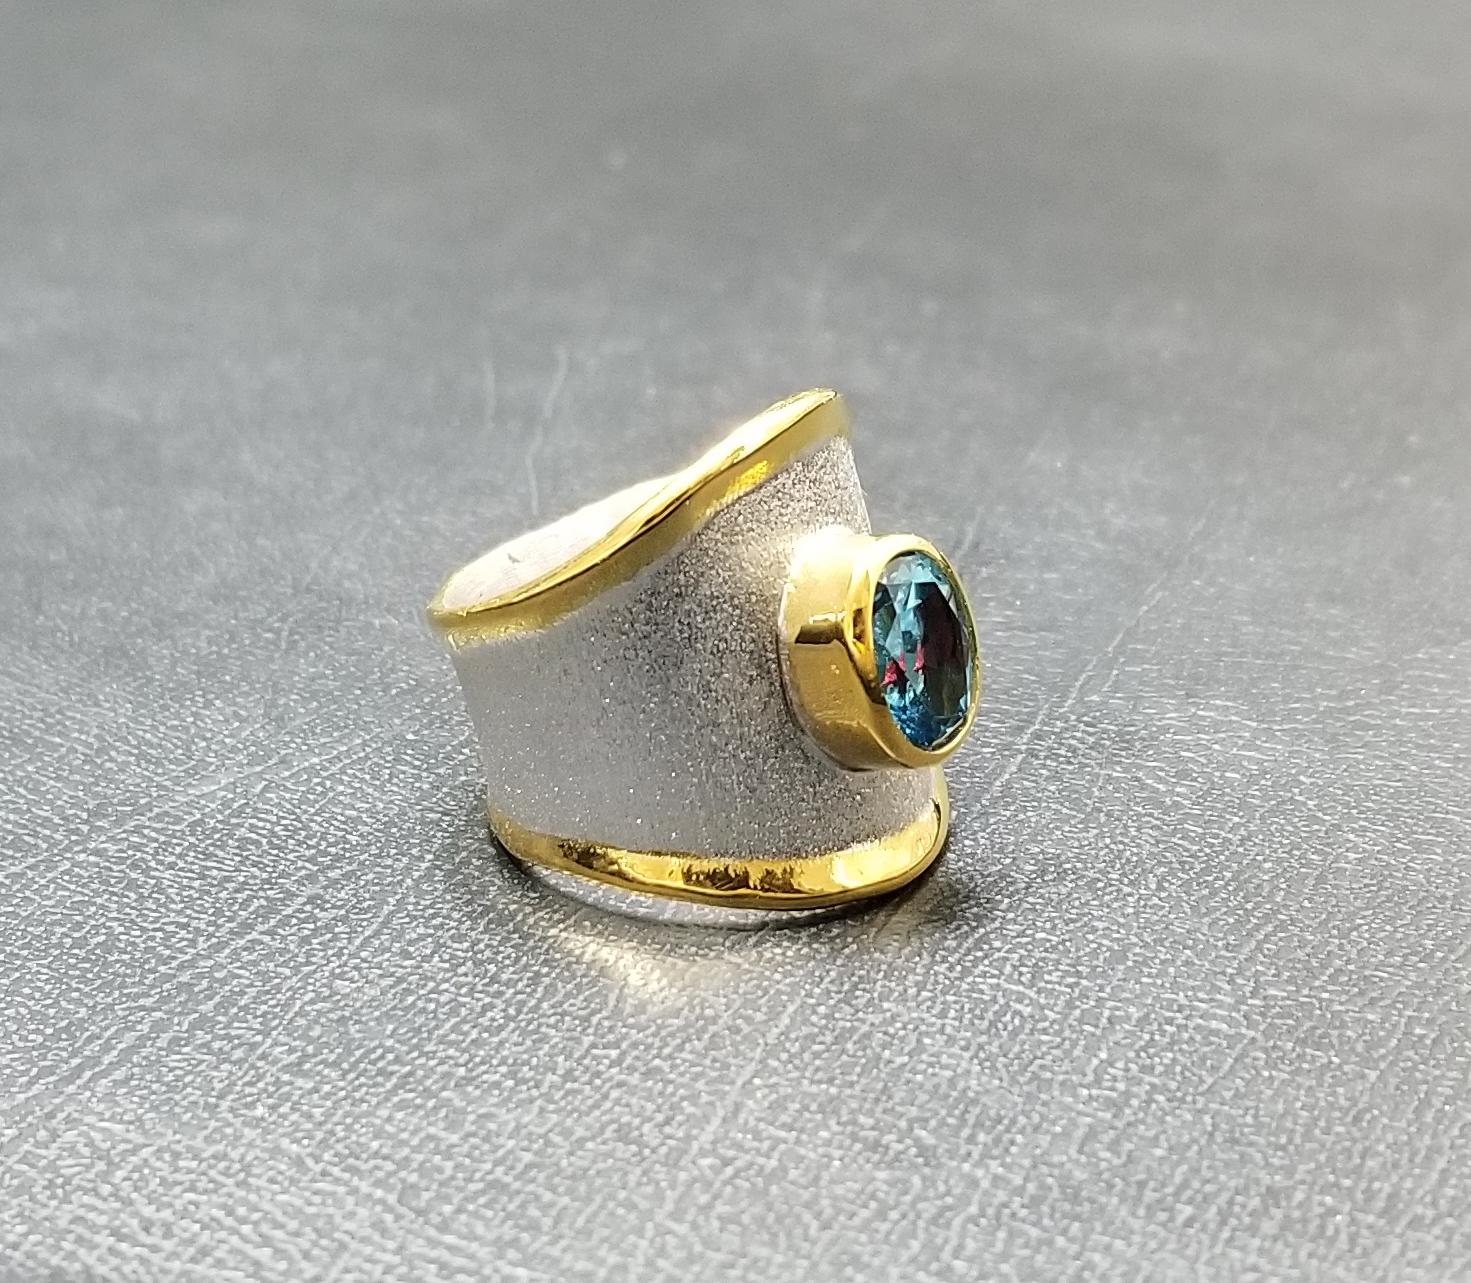 From Yianni Creations - Midas Collection is a 950 purity fine silver and 24 karat gold band ring handmade in Greece. The gorgeous ring is plated with palladium to resist the elements and the liquid edges are decorated with 24-carat gold. The unique